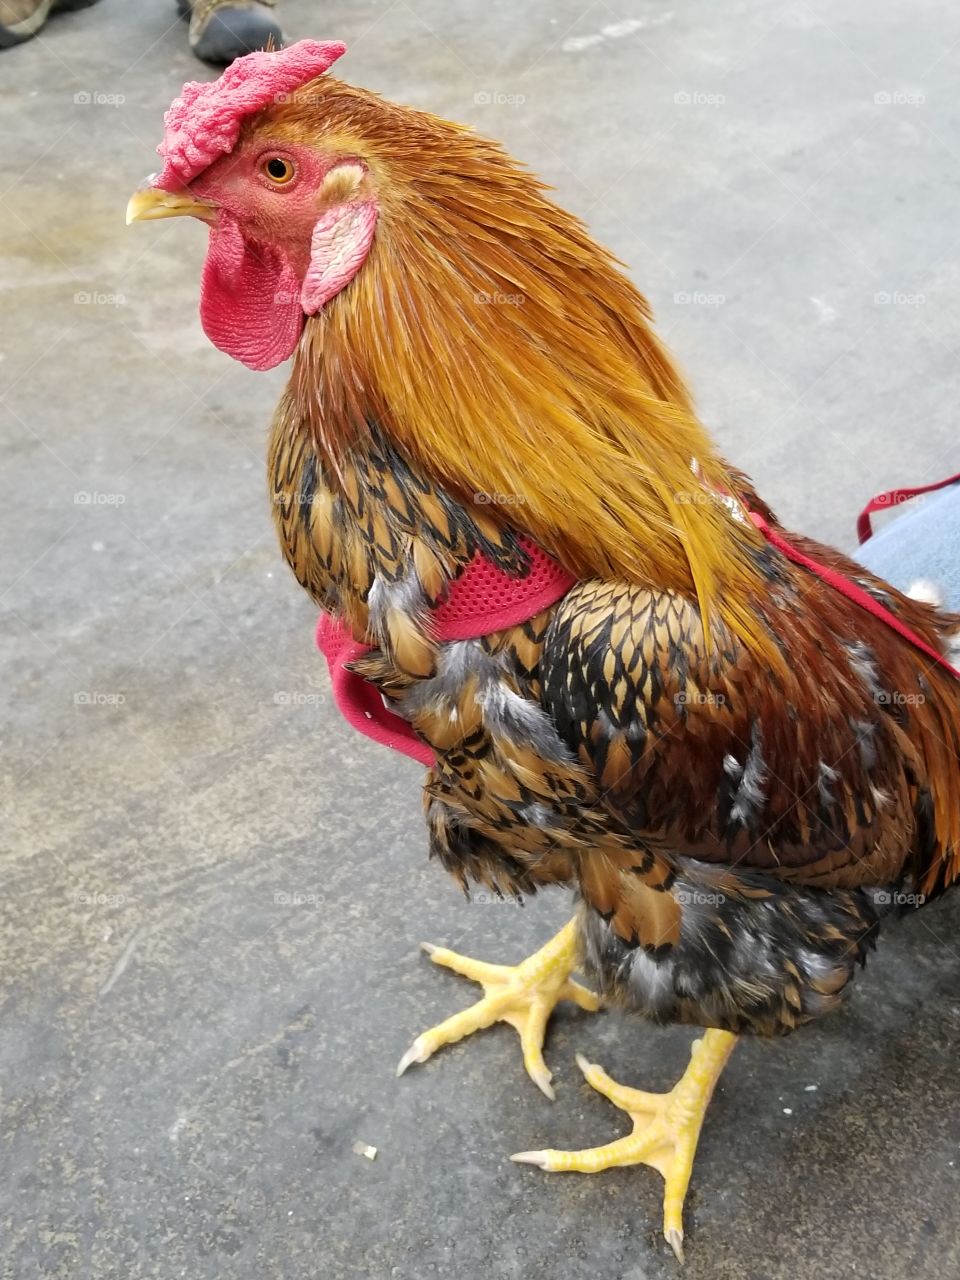 Shake our store rooster